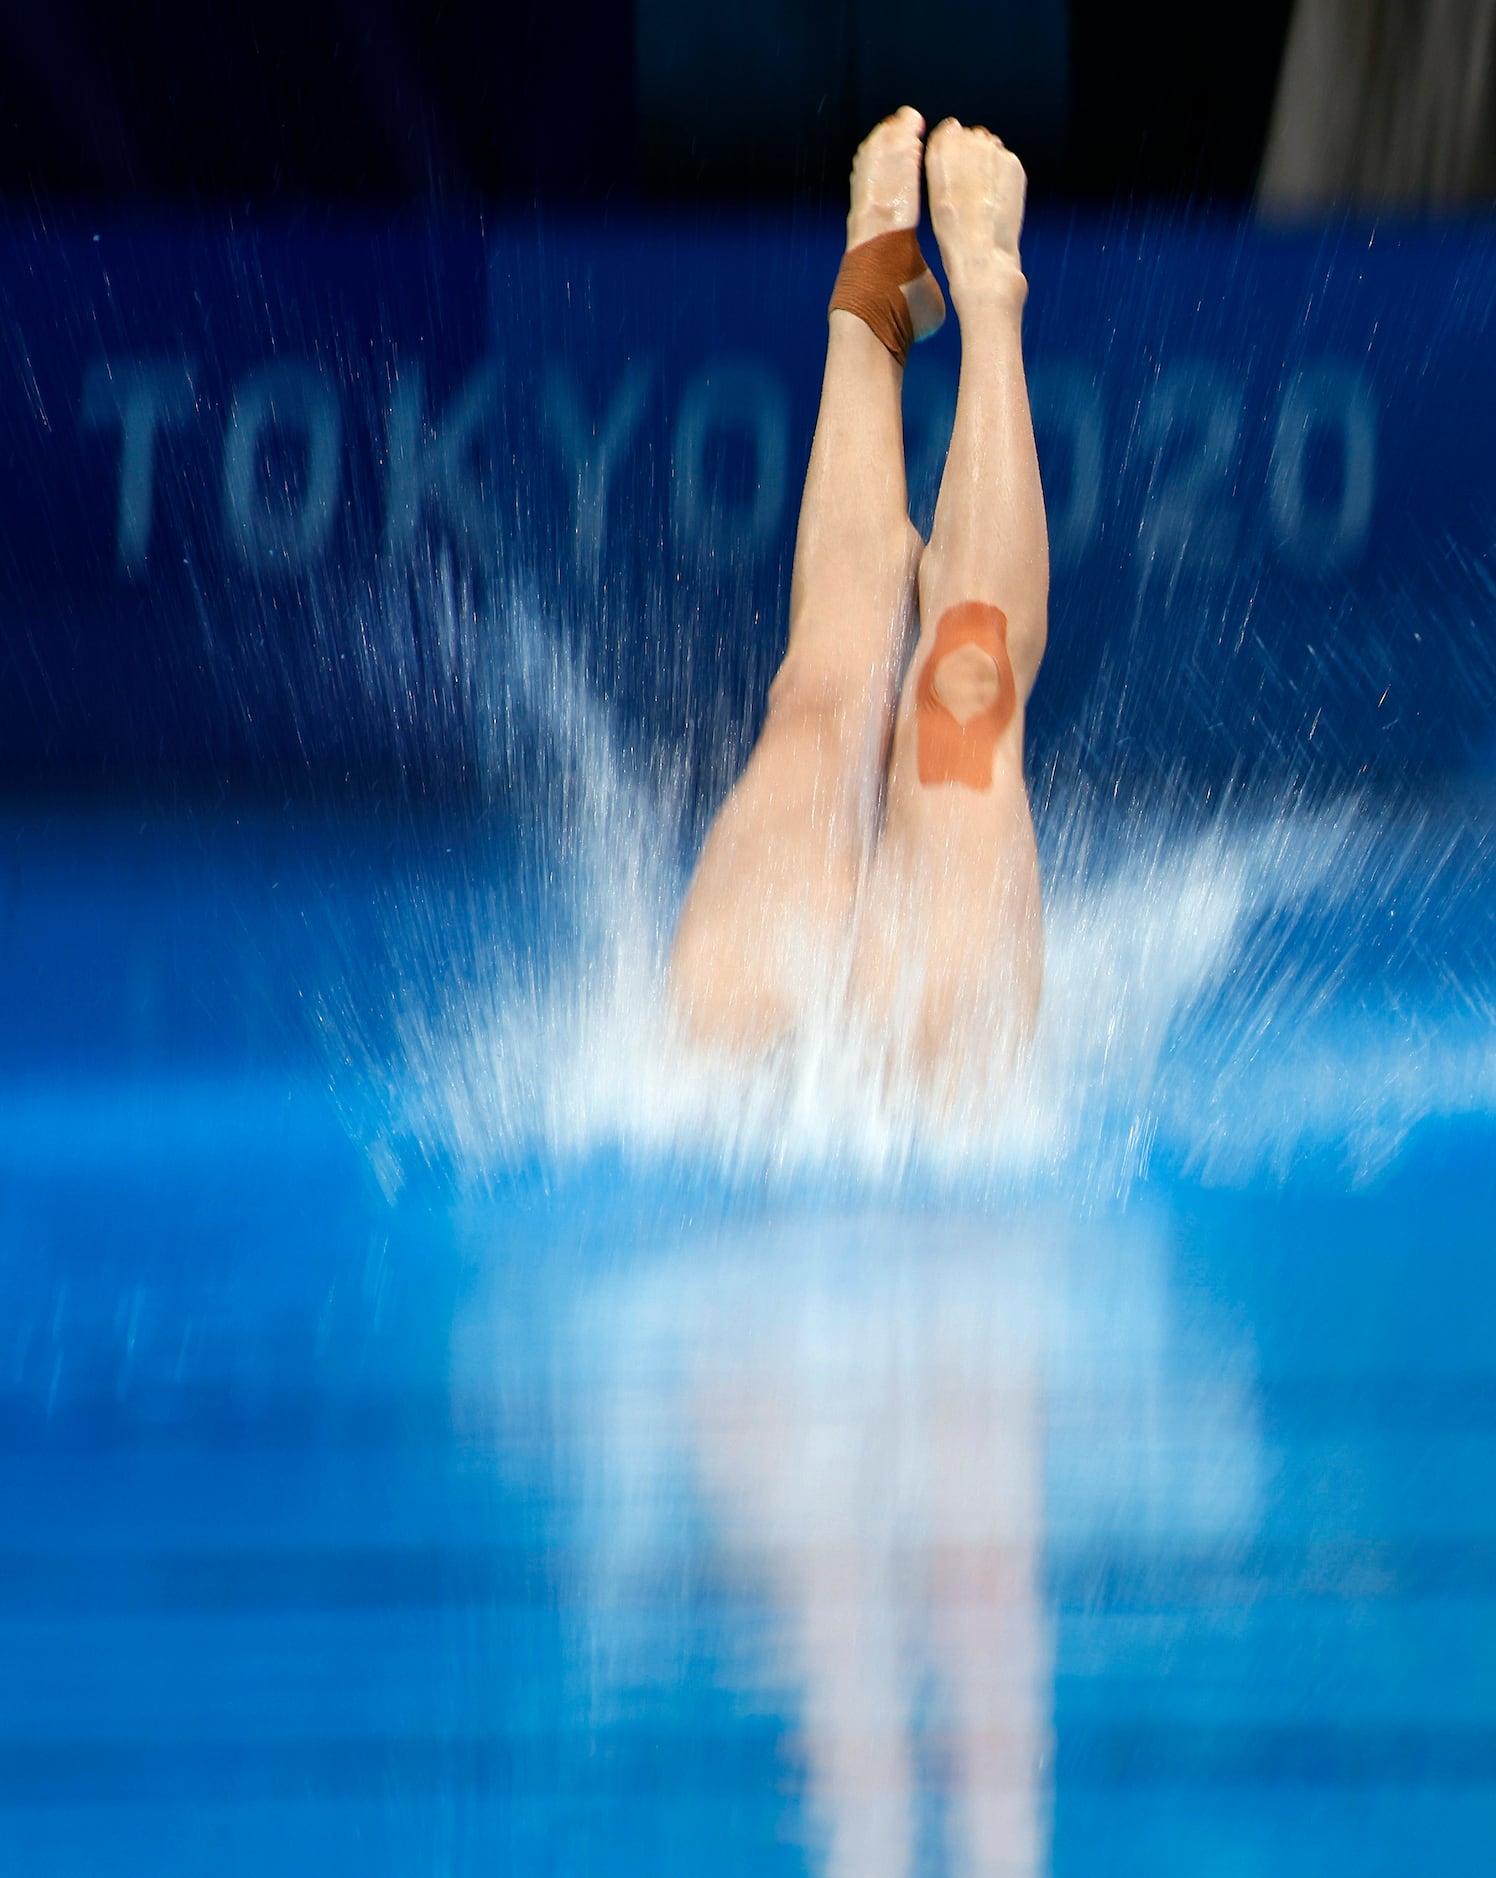 China’s Wang Han dives in round 2 of 5 in the women’s 3 meter springboard semifinal...